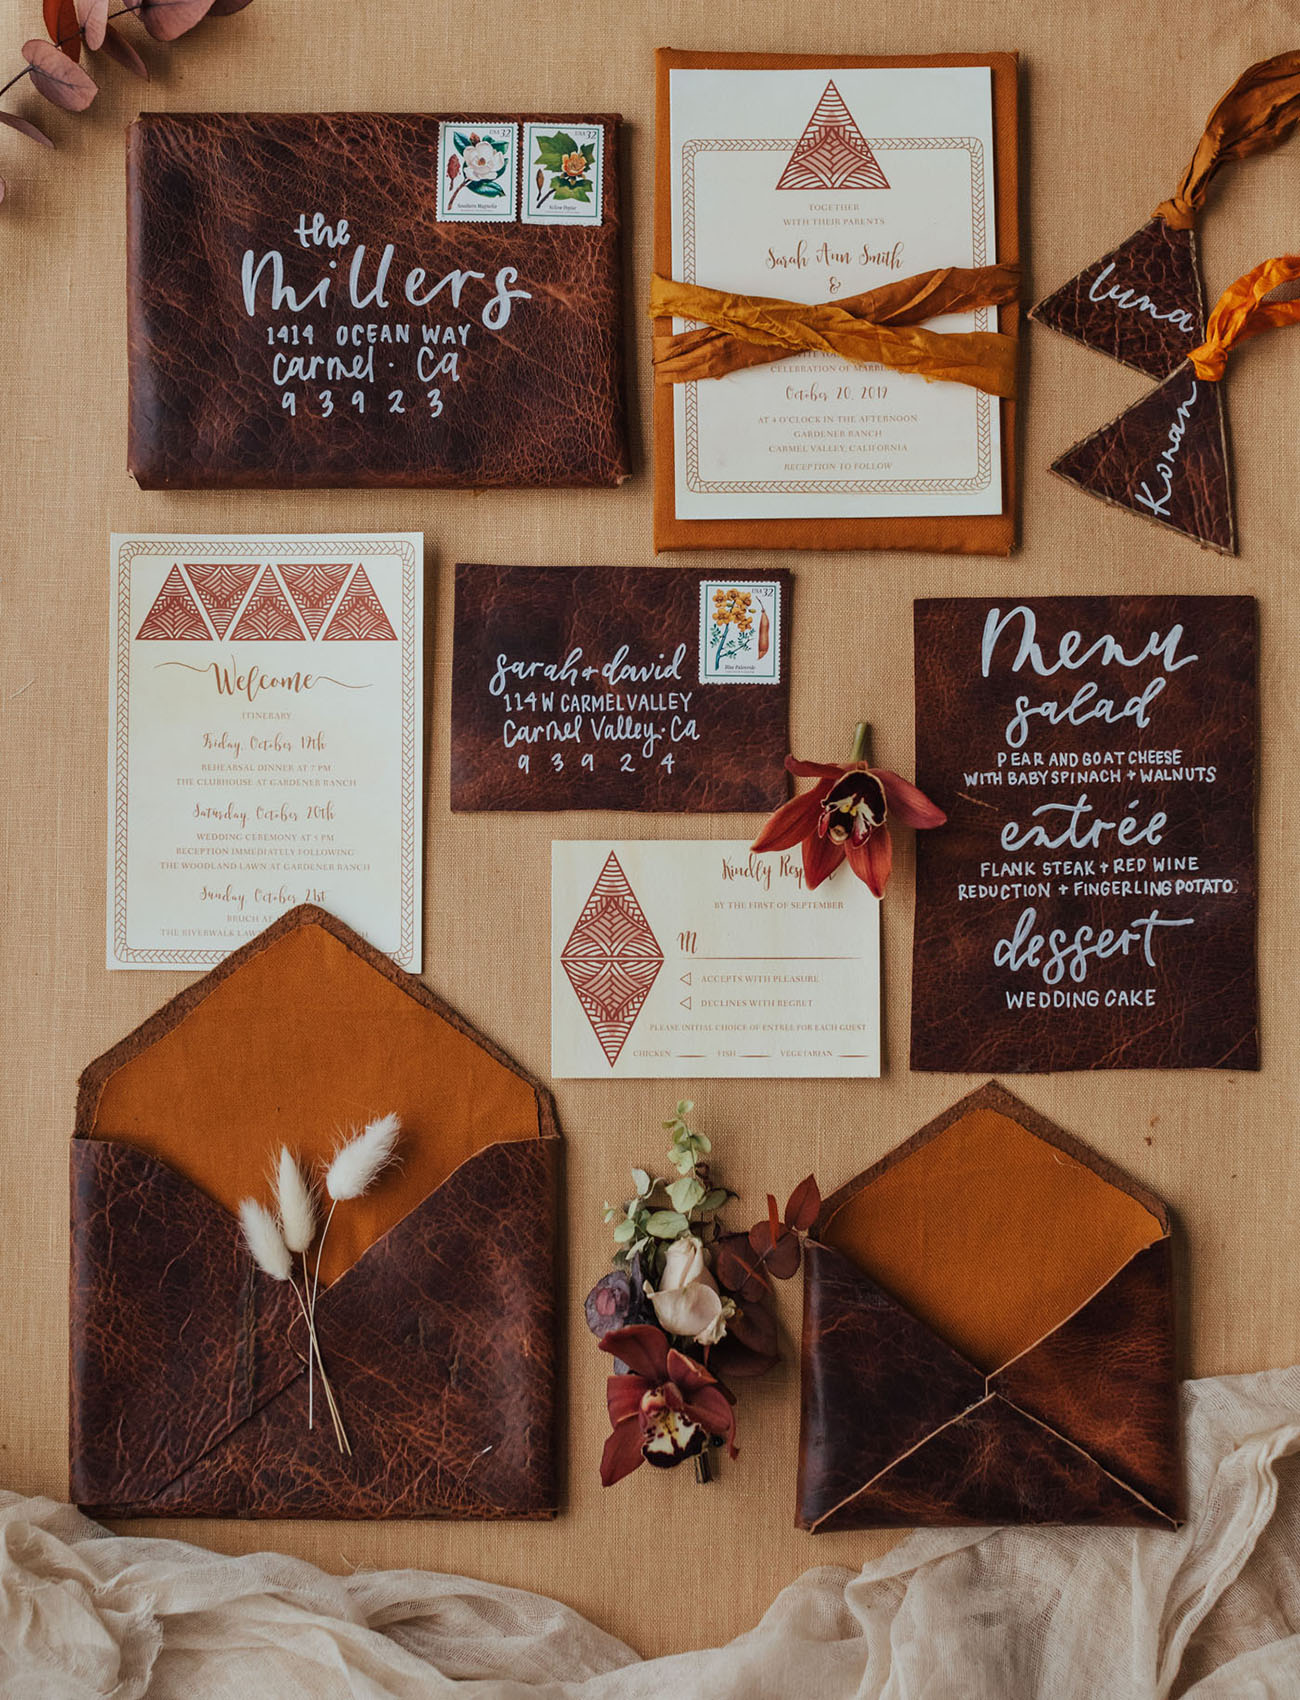 The wedding invitation suite was done with brown leather and amber touches, with velvet ribbons